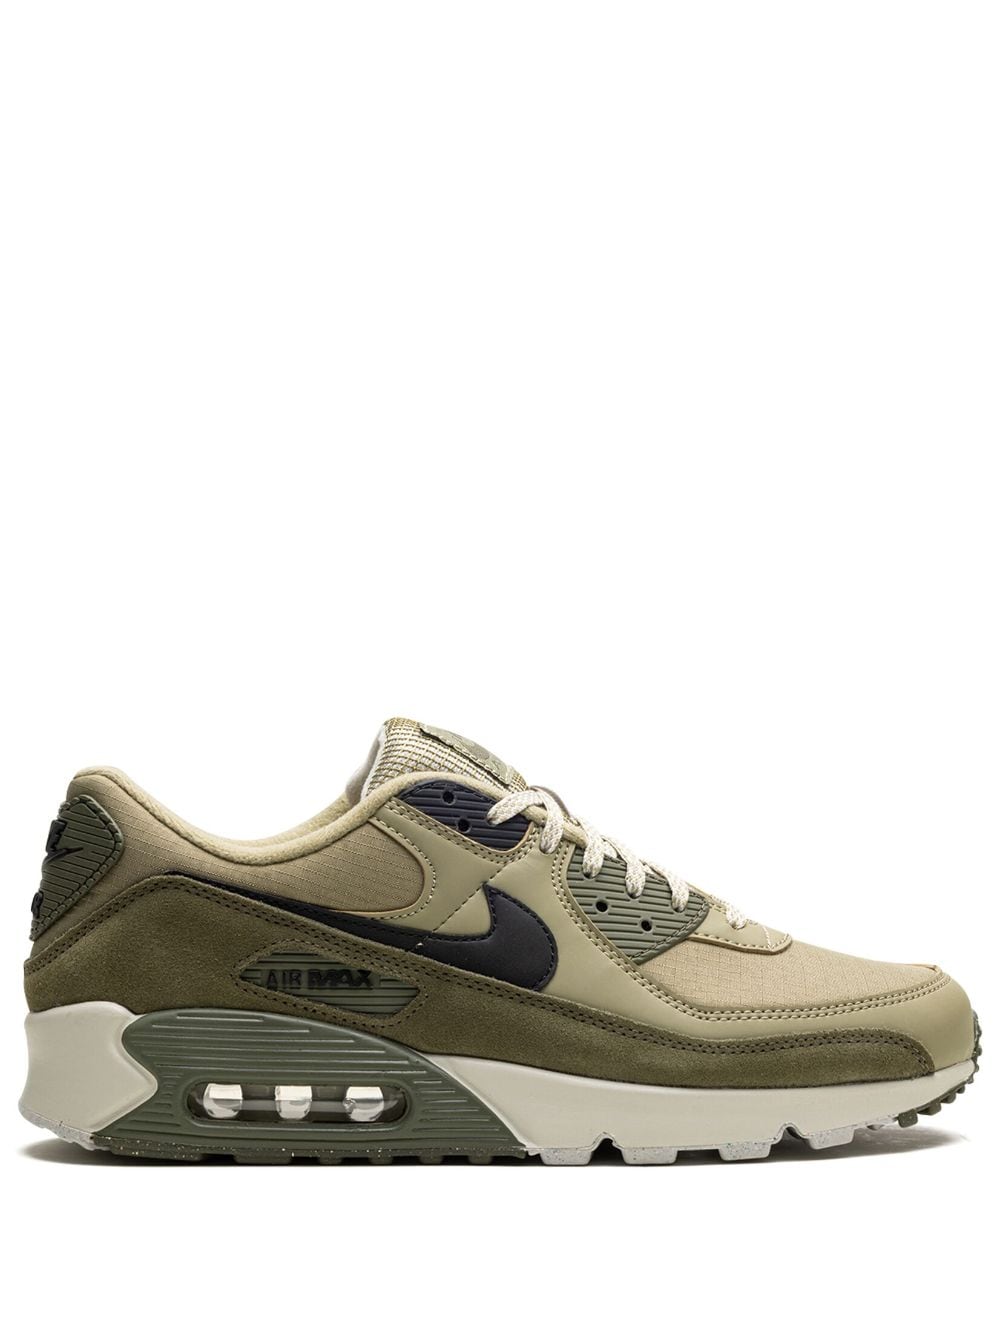 Air Max 90 "Neutral Olive" sneakers